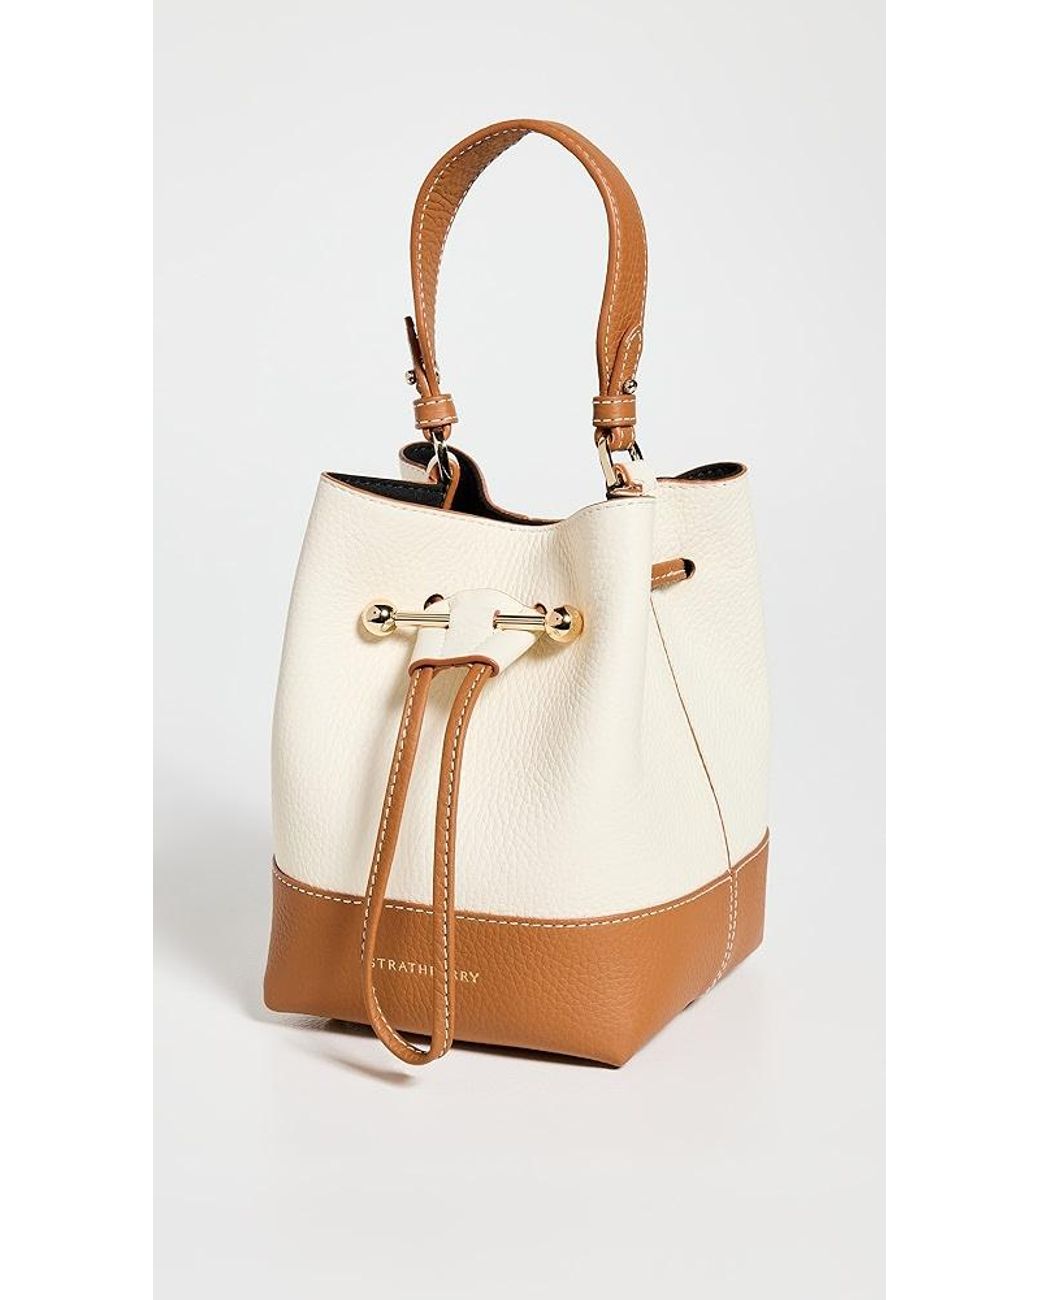 Strathberry Lana Osette Leather Bucket Bag in White